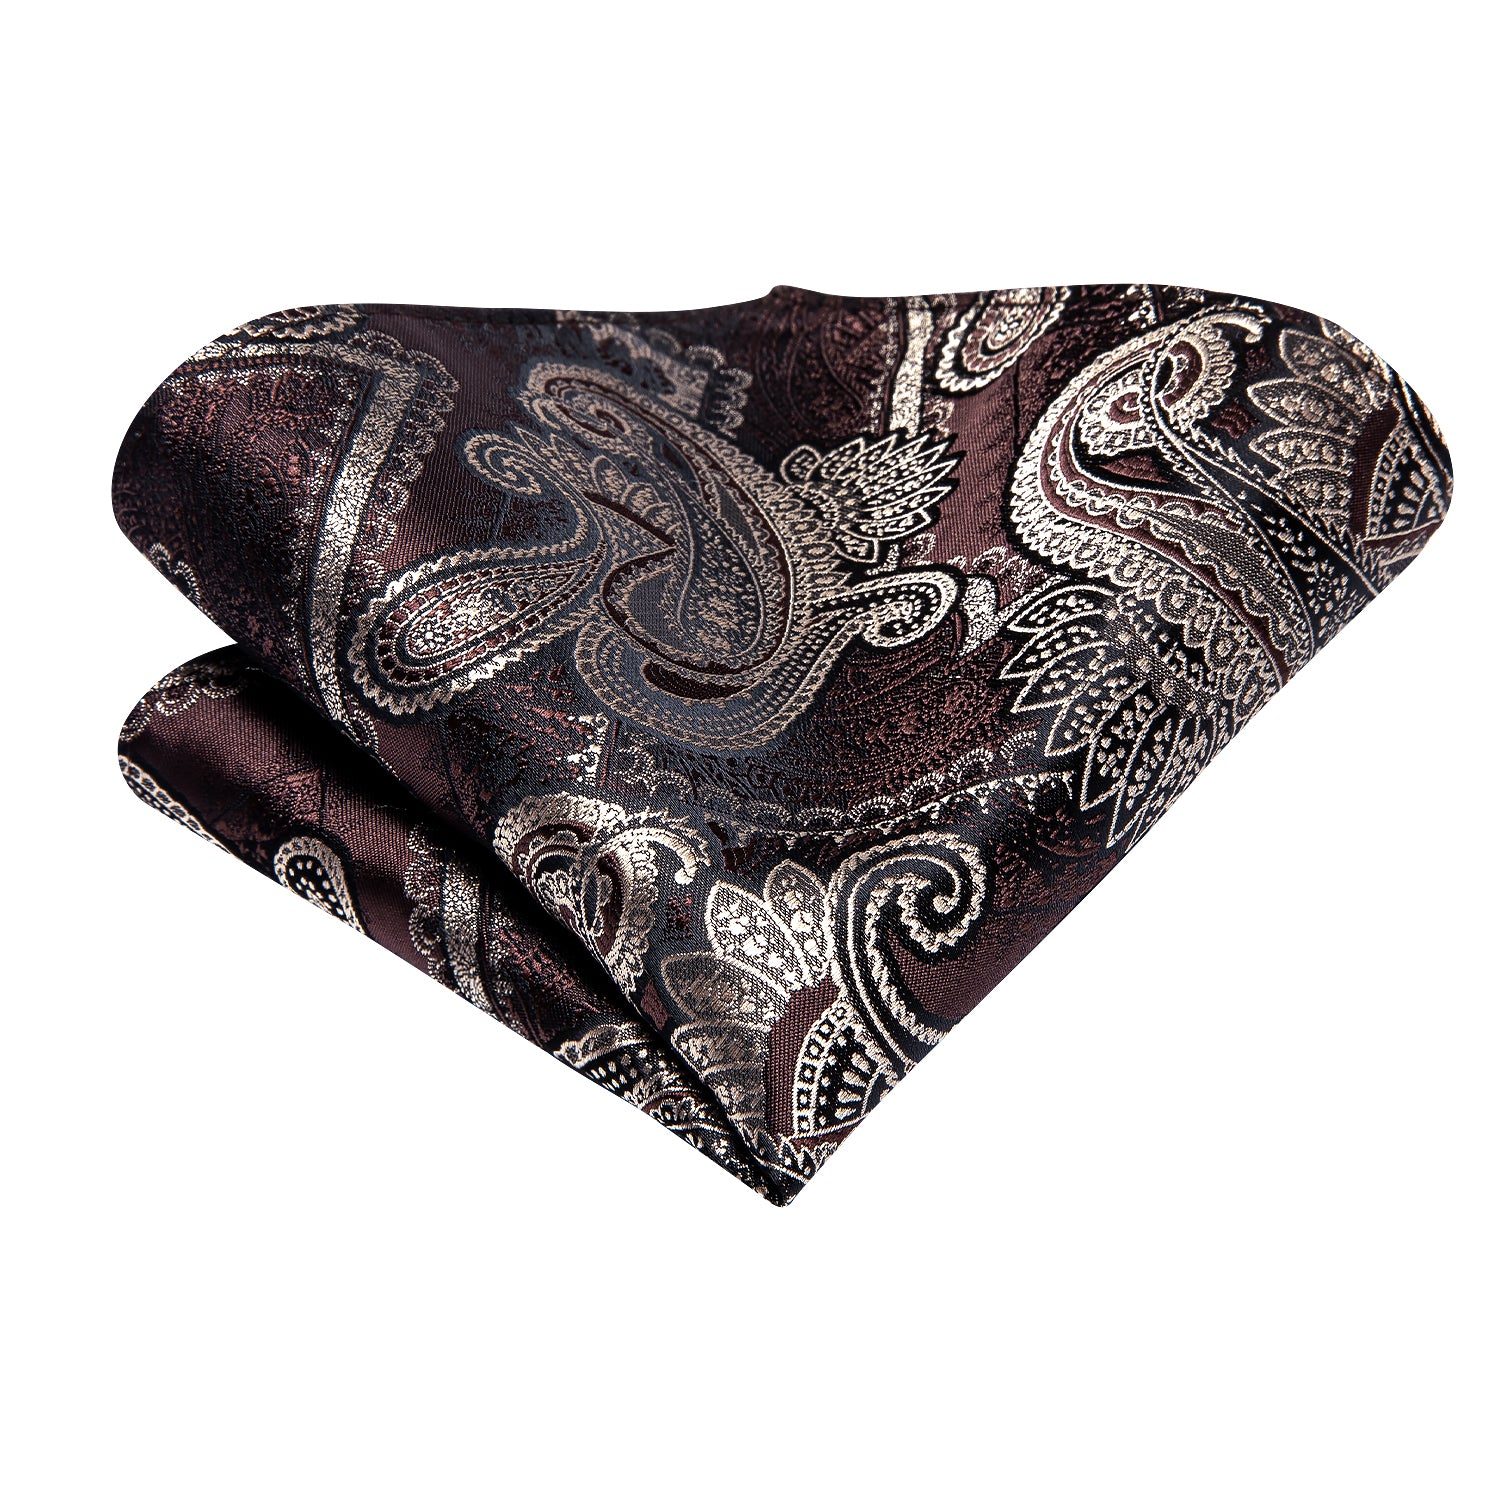 Red-brown Silver Paisley Tie Pocket Square Cufflinks Set